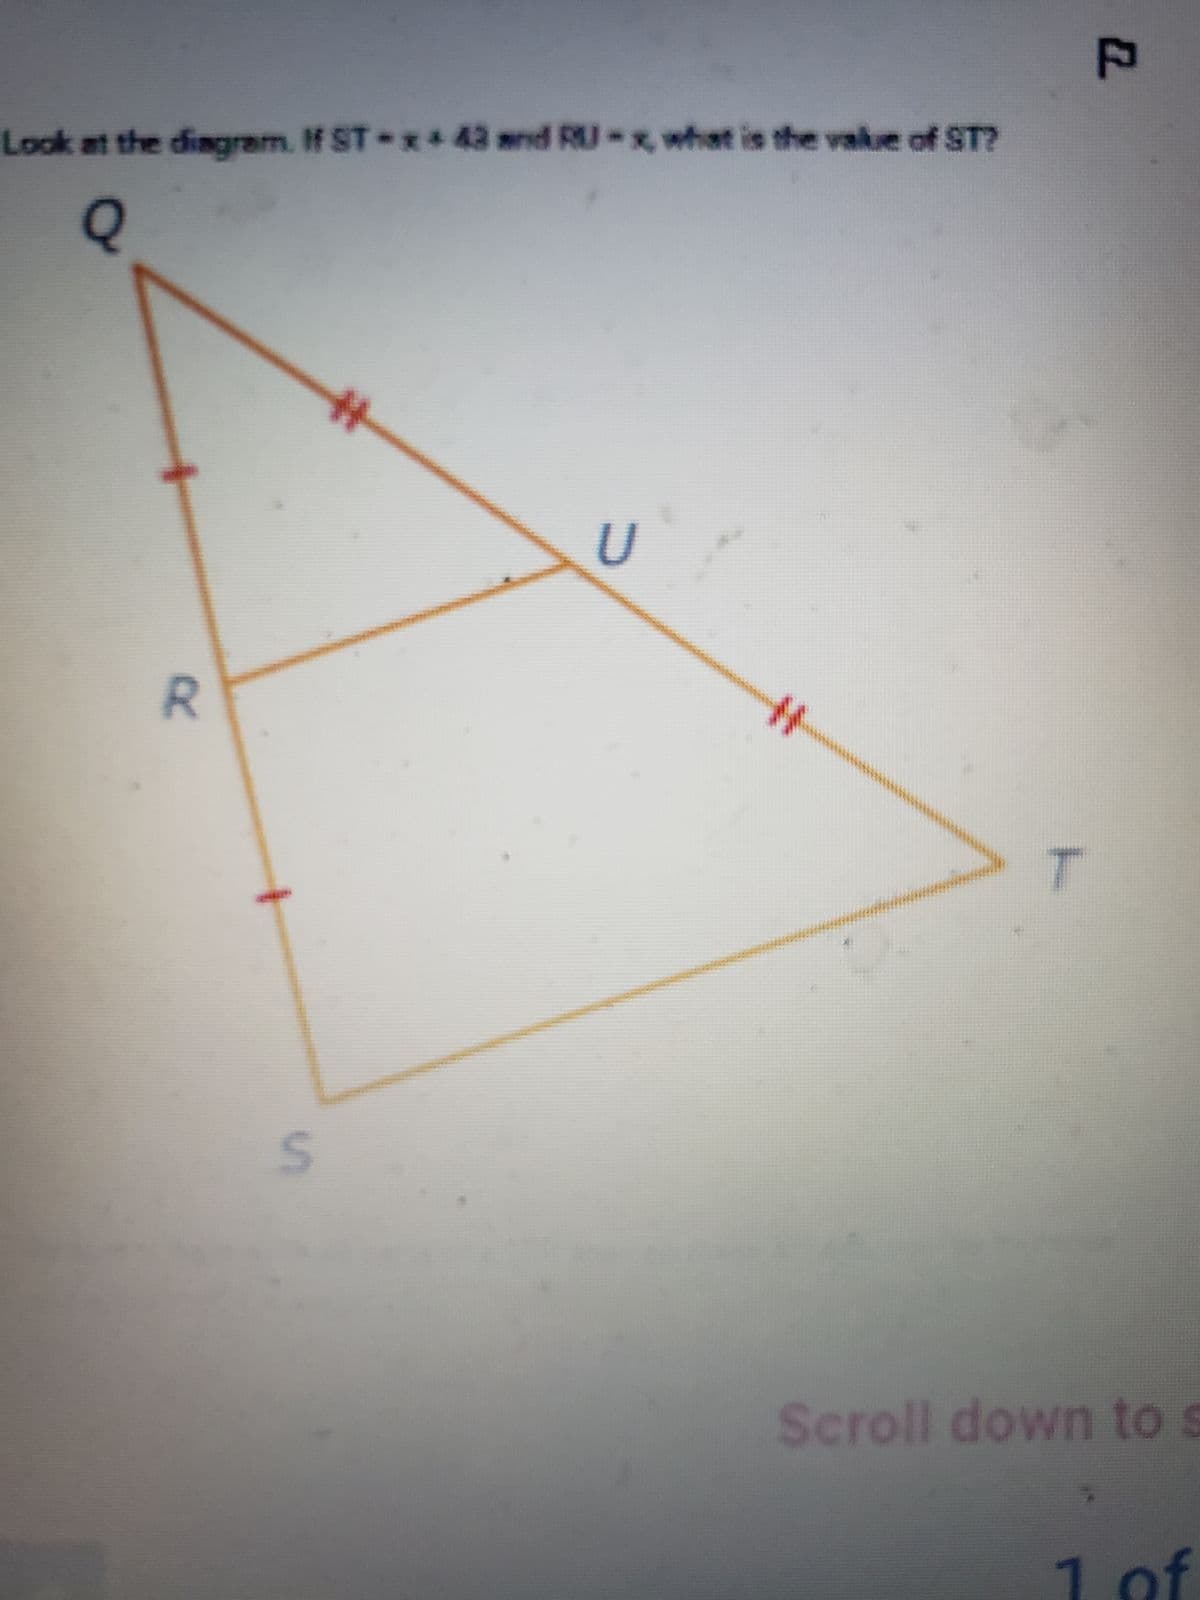 Look at the diagram. If ST-x+43 and RU-x, what is the value of ST?
Q
R
S
U
MM
P
Scroll down to s
1 of